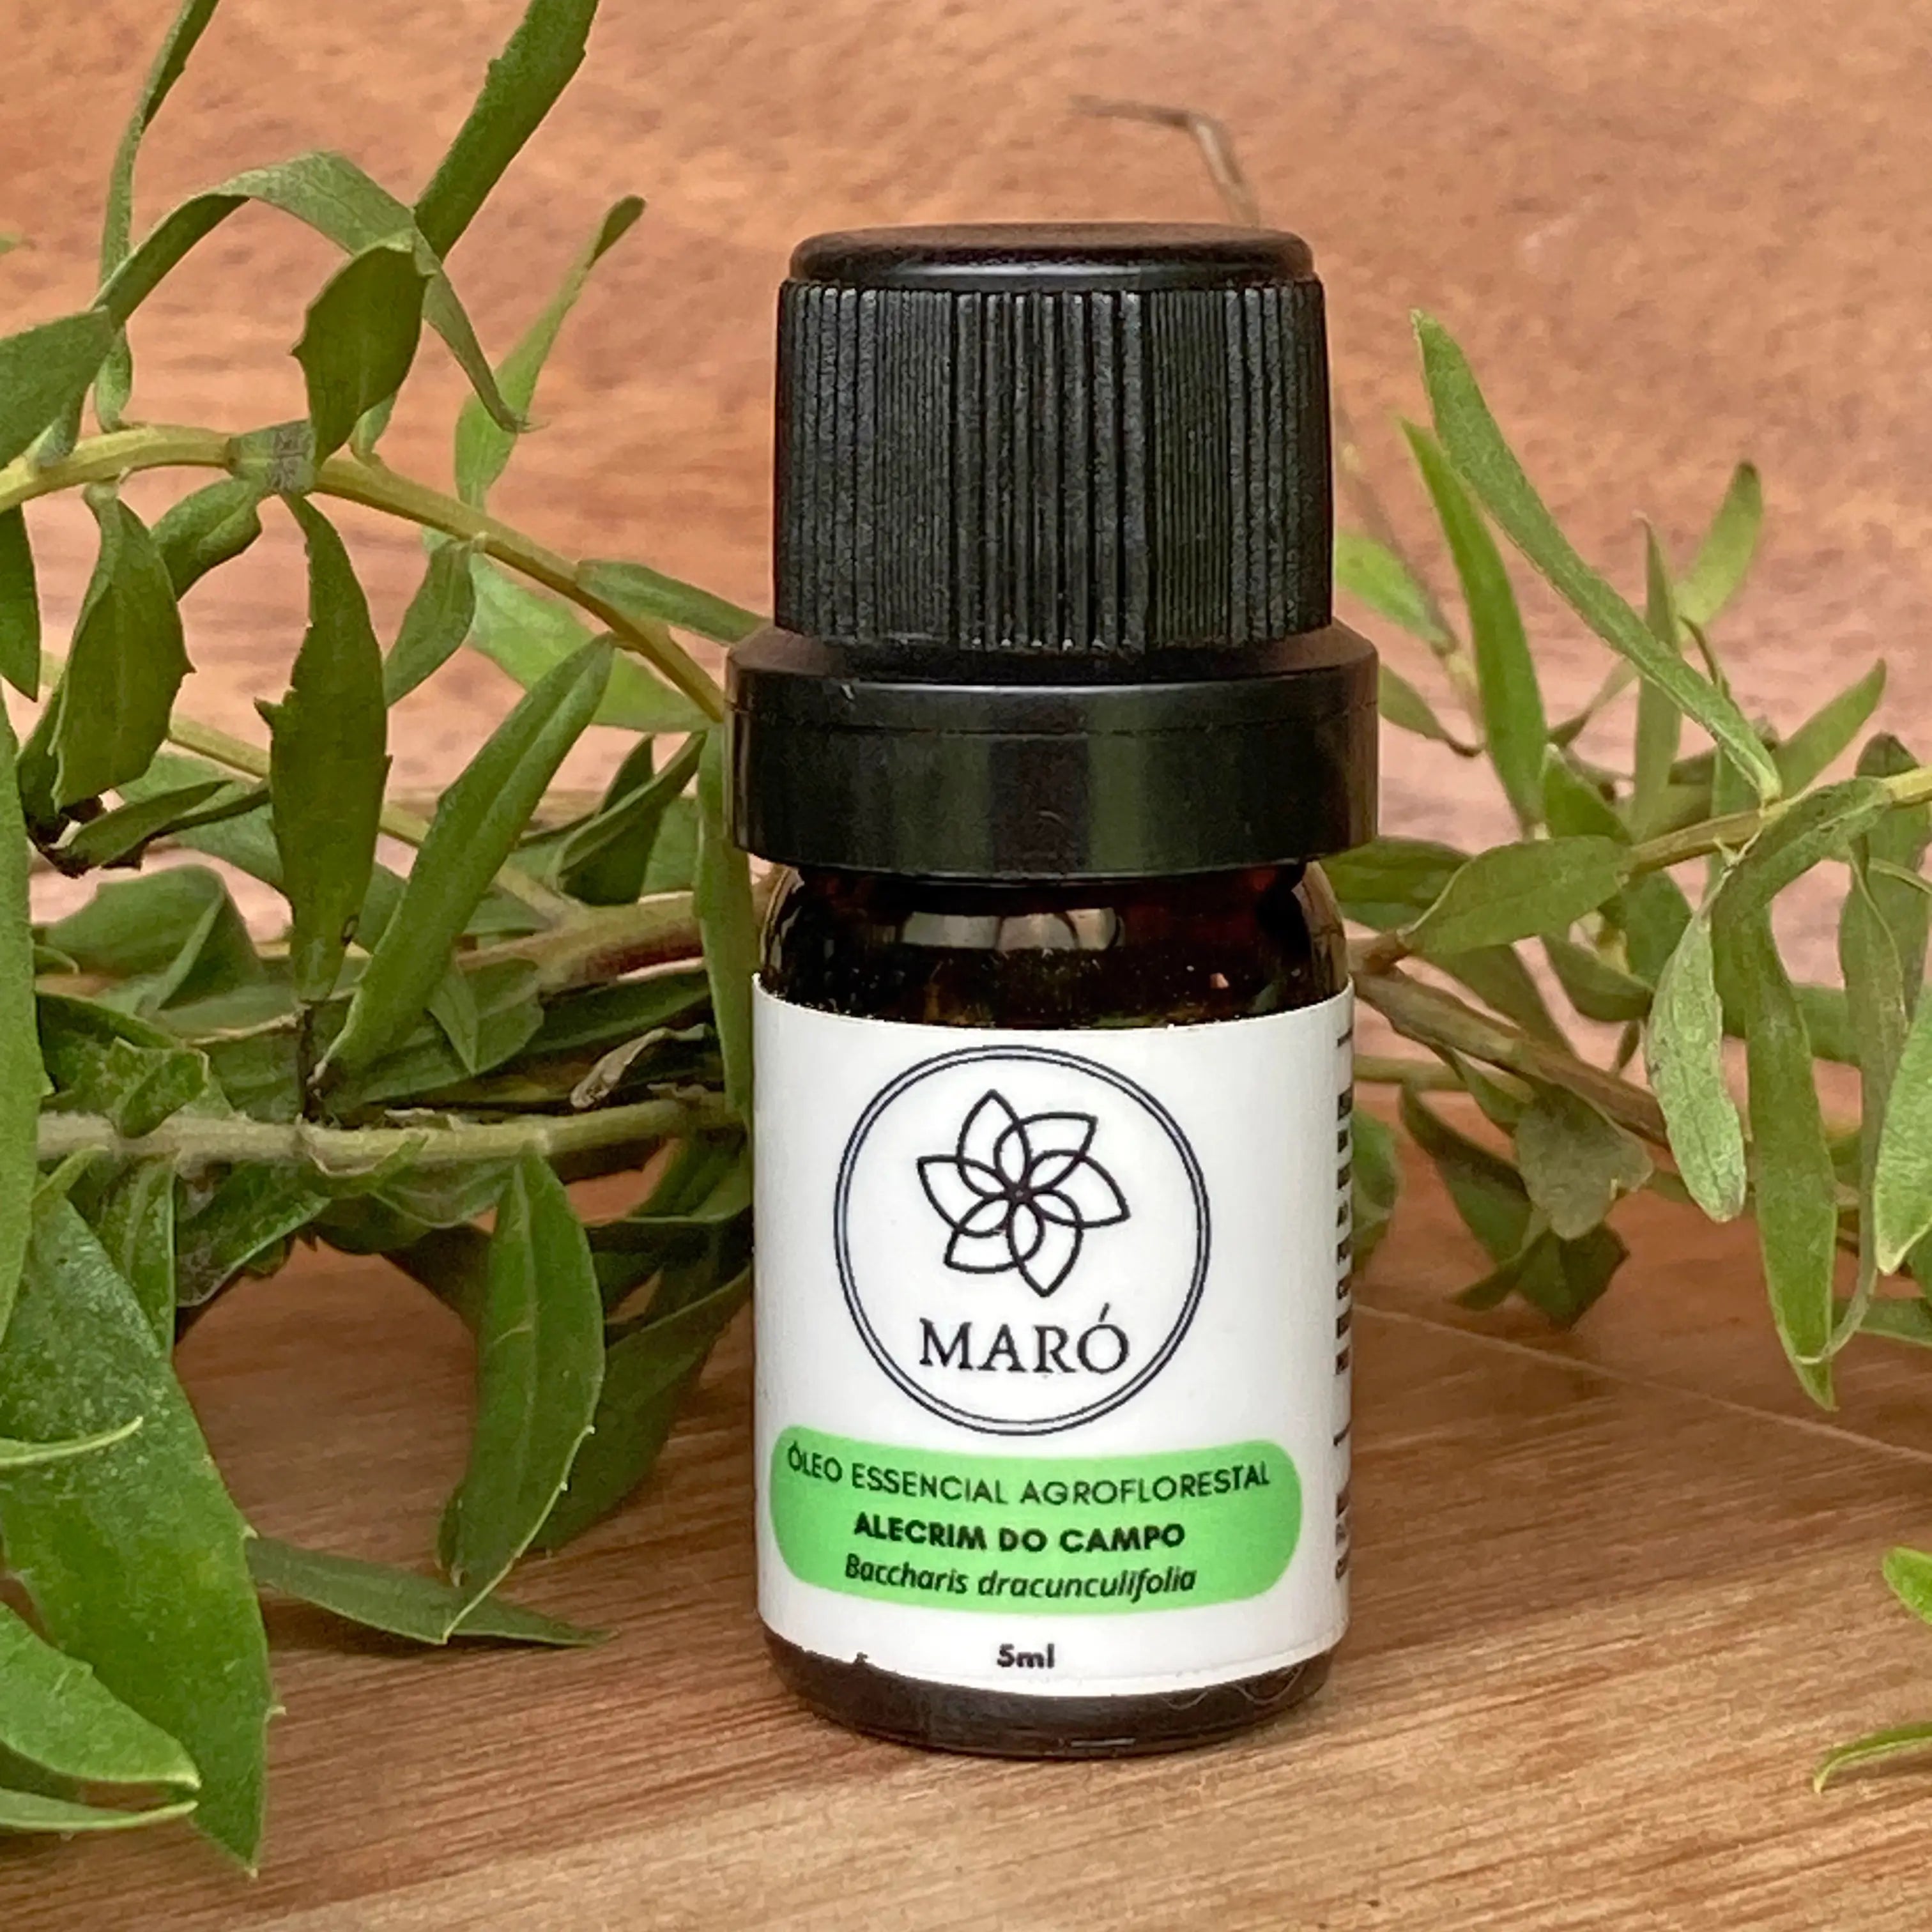 Rosemary Essential Oil from Campo Maró Natural Antiseptic 5ml